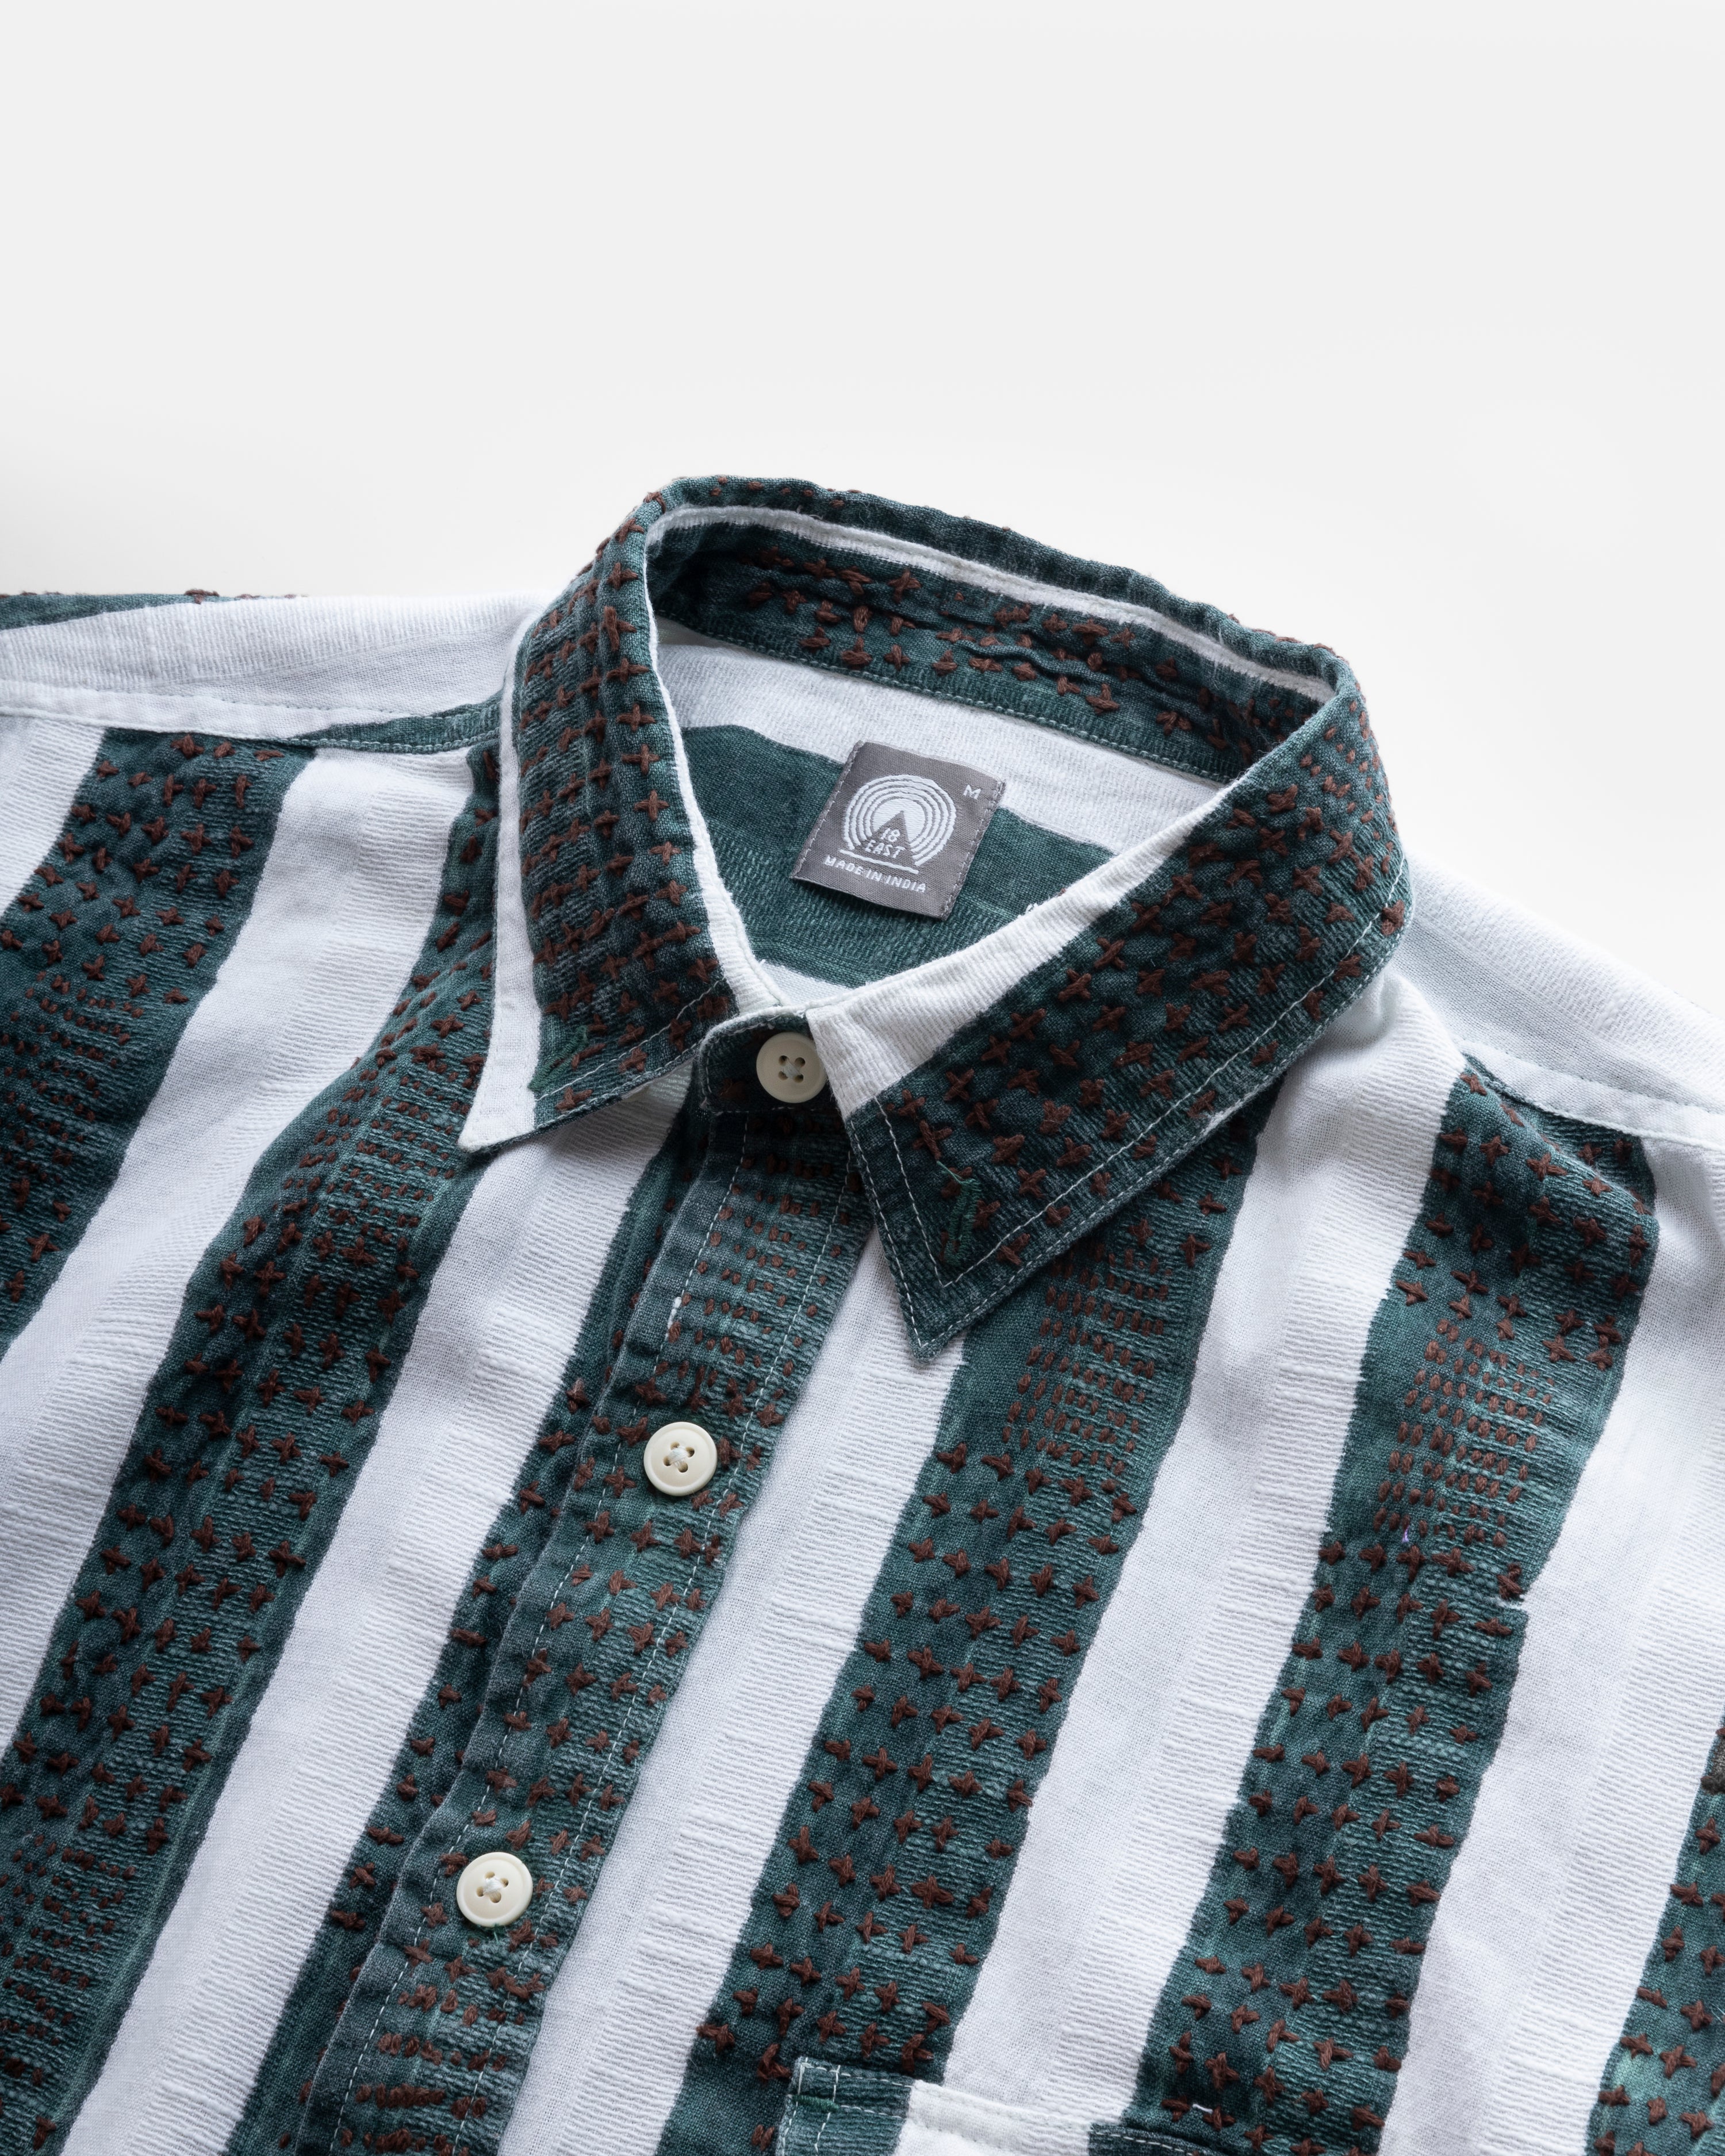 CHESTNUT BUTTON-DOWN SHIRT - NATURAL / BOTTLE / CAFFE BLOCK PRINTED AND HAND EMBROIDERED JACQUARD STRIPE COTTON